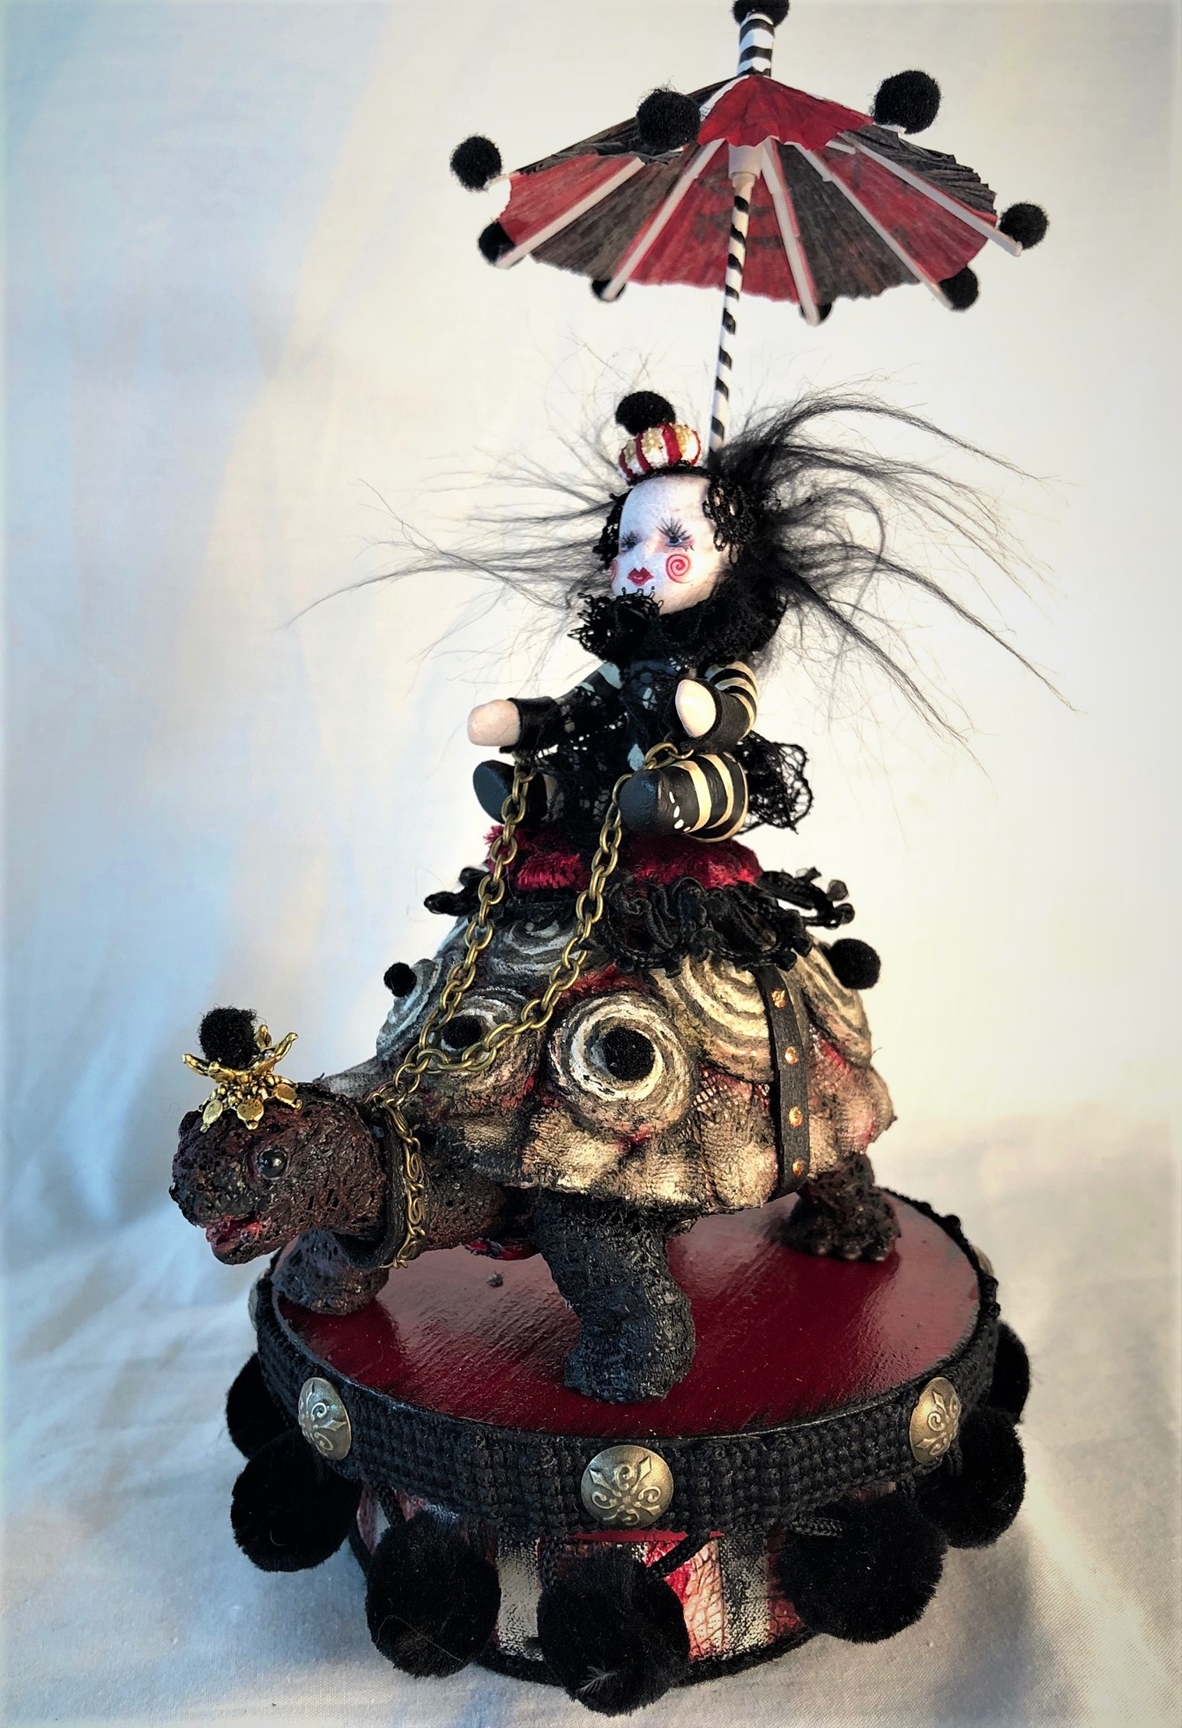 mixed media striped miniature gothic circus performer in black white and red stripes, shaded by a parasol rides a hand-painted vintage toy turtle on a painted wooden platform